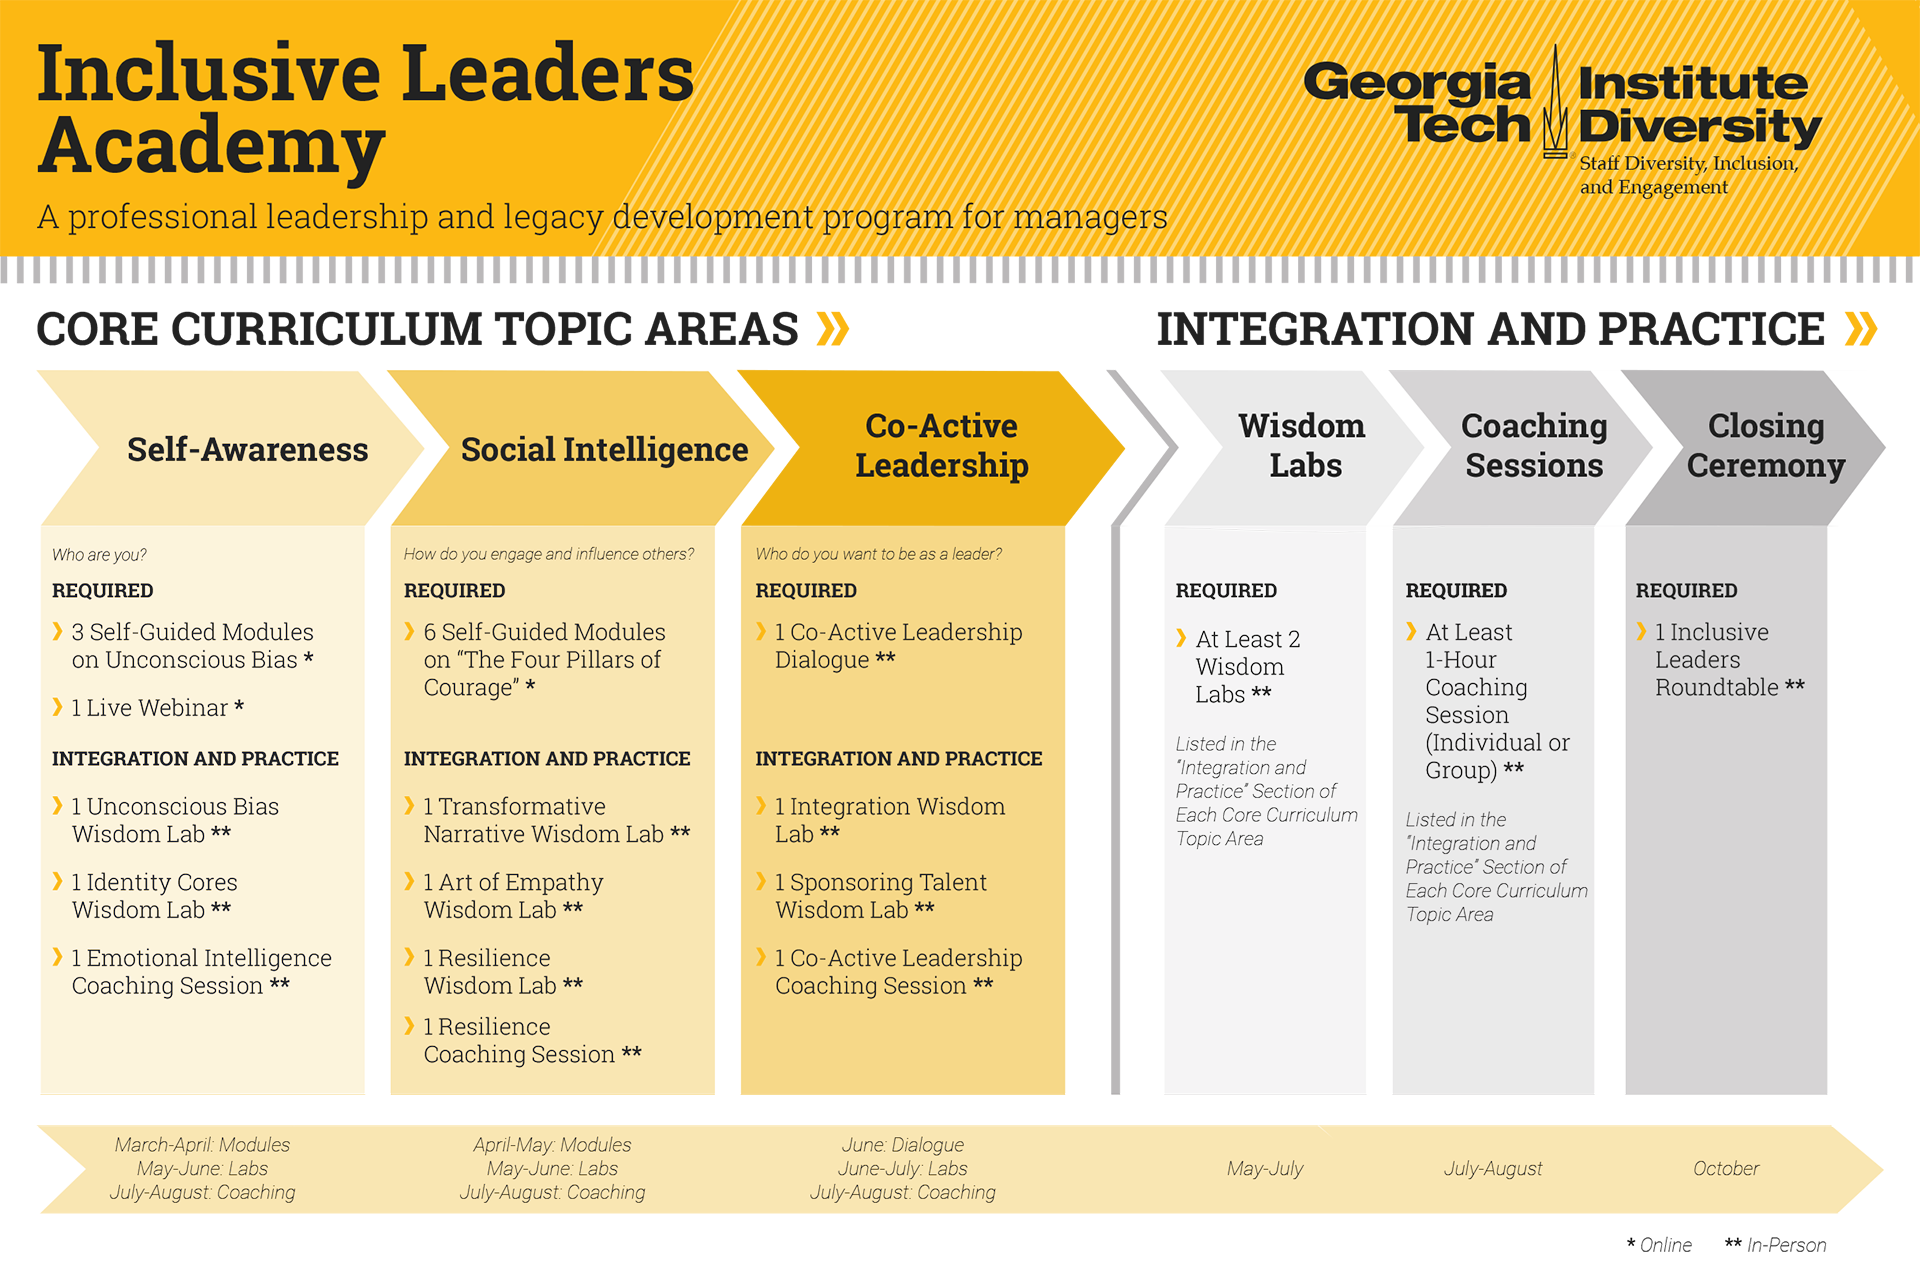 The key learning benefits of the Inclusive Leaders Academy – and core curriculum topic areas – facilitate self-awareness, social intelligence, and co-active leadership. Curriculum content has been curated from the NeuroLeadership Institute on unconscious bias and from Brave Leaders Inc on Daring Leadership: The Four Pillars of Courage based on the research of Brené Brown. This combination of self-paced online learning is supplemented with interactive group activities through wisdom labs and coaching se